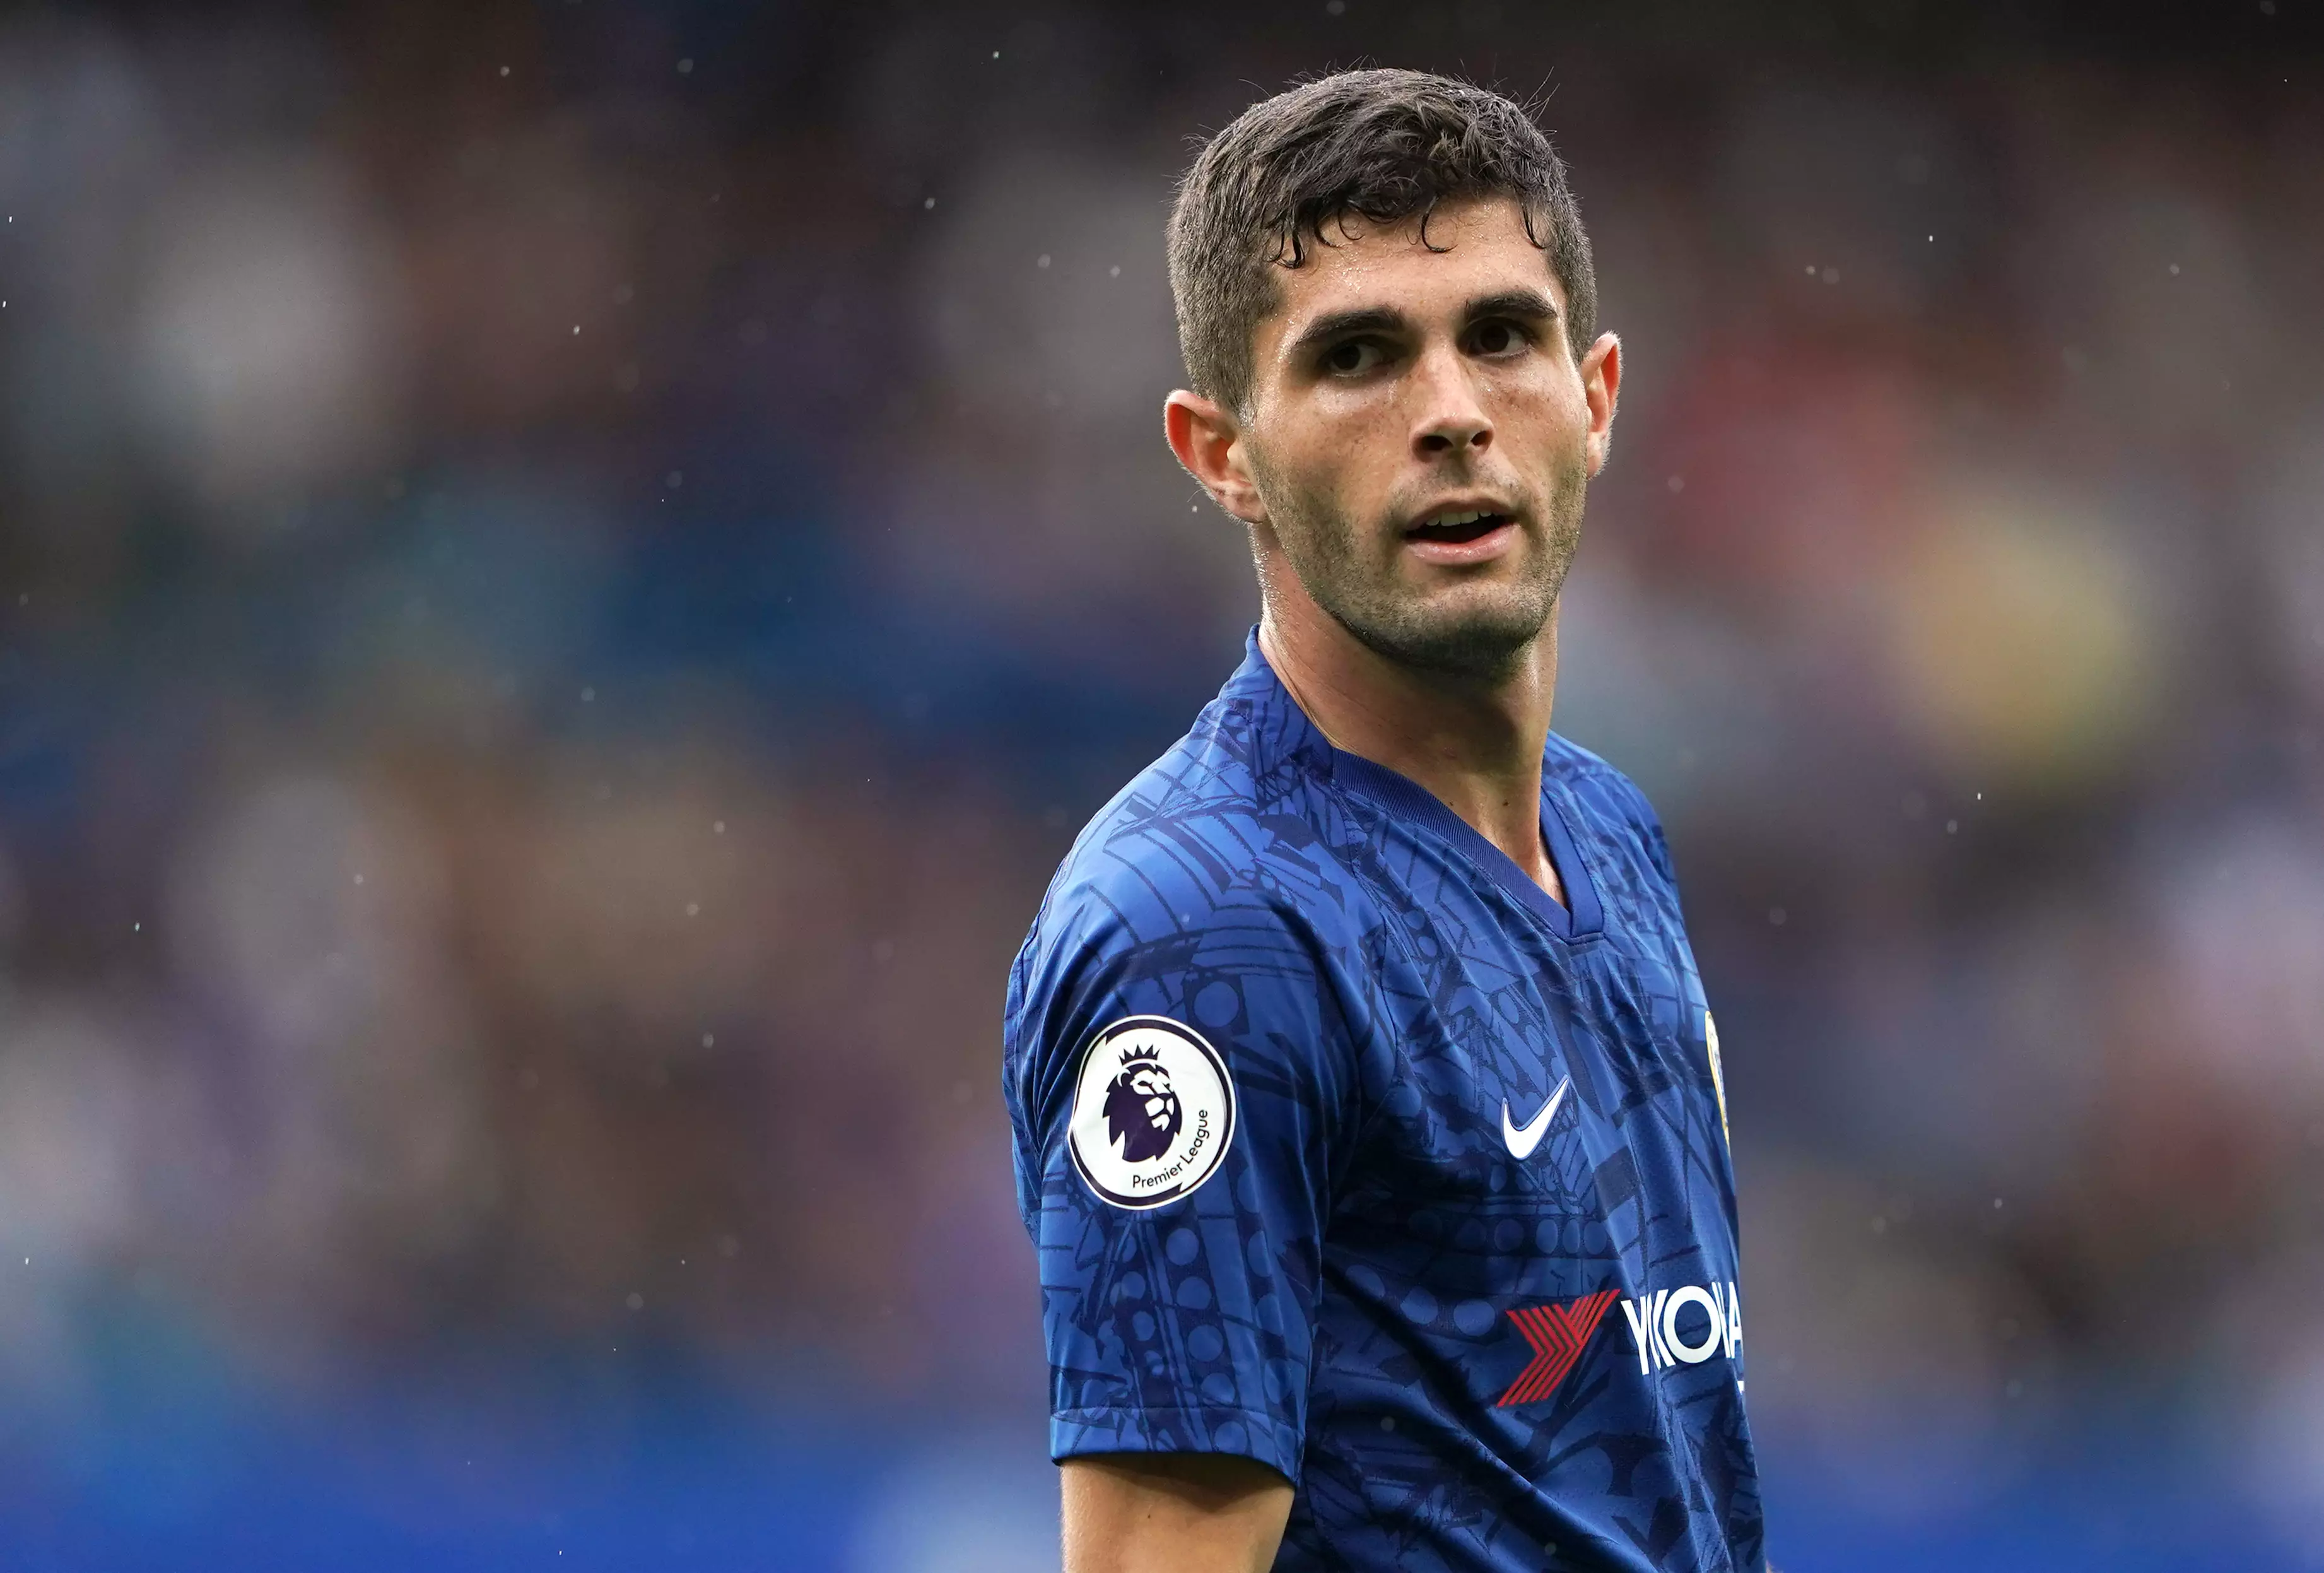 Pulisic is without a goal at Chelsea so far. Image: PA Images